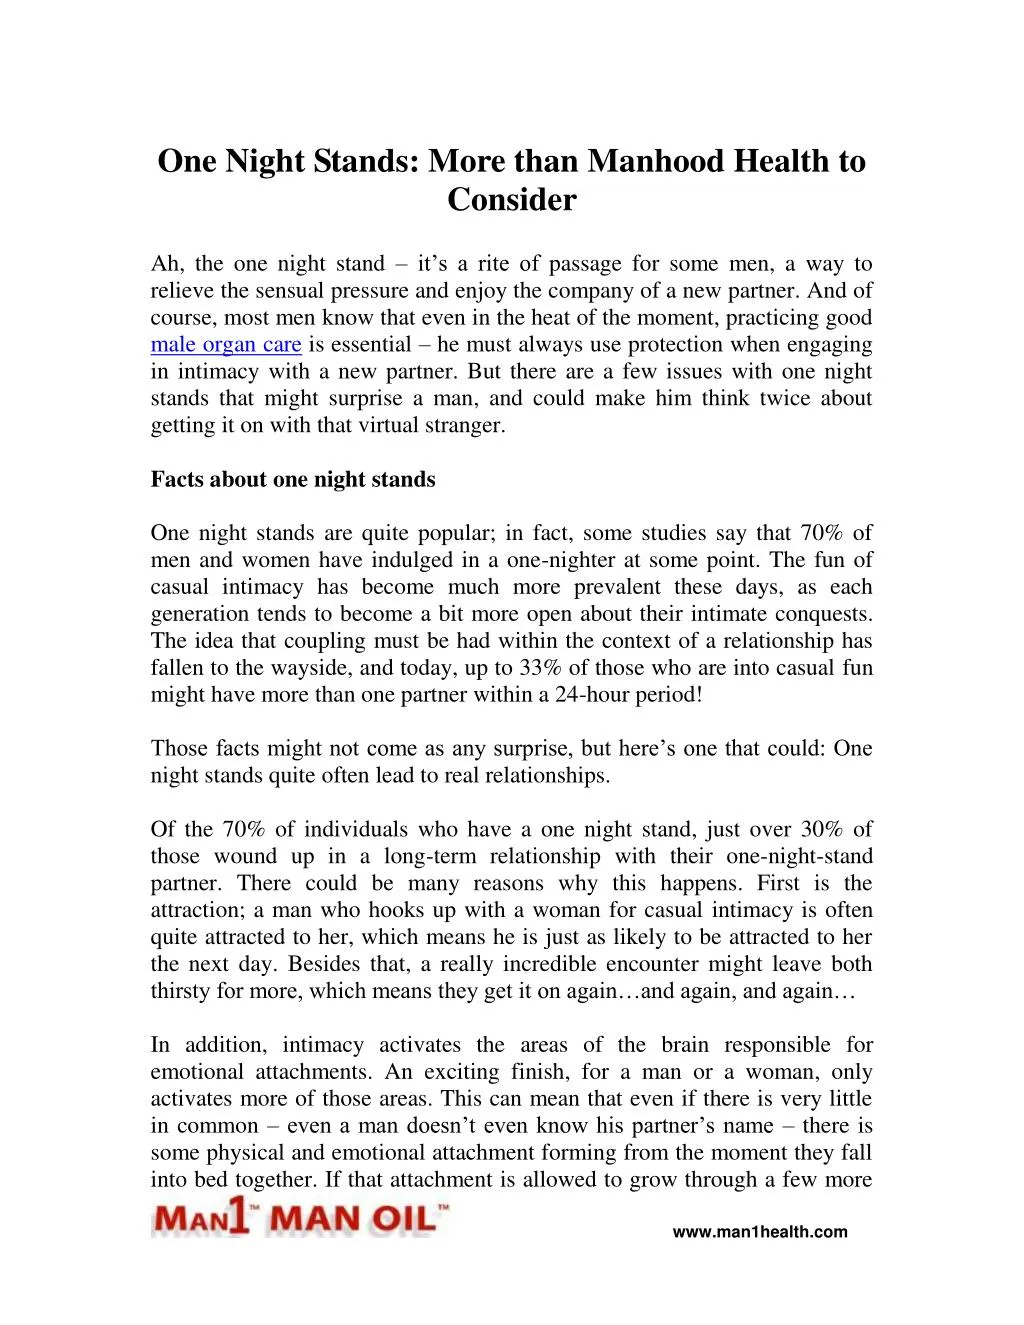 one night stands more than manhood health